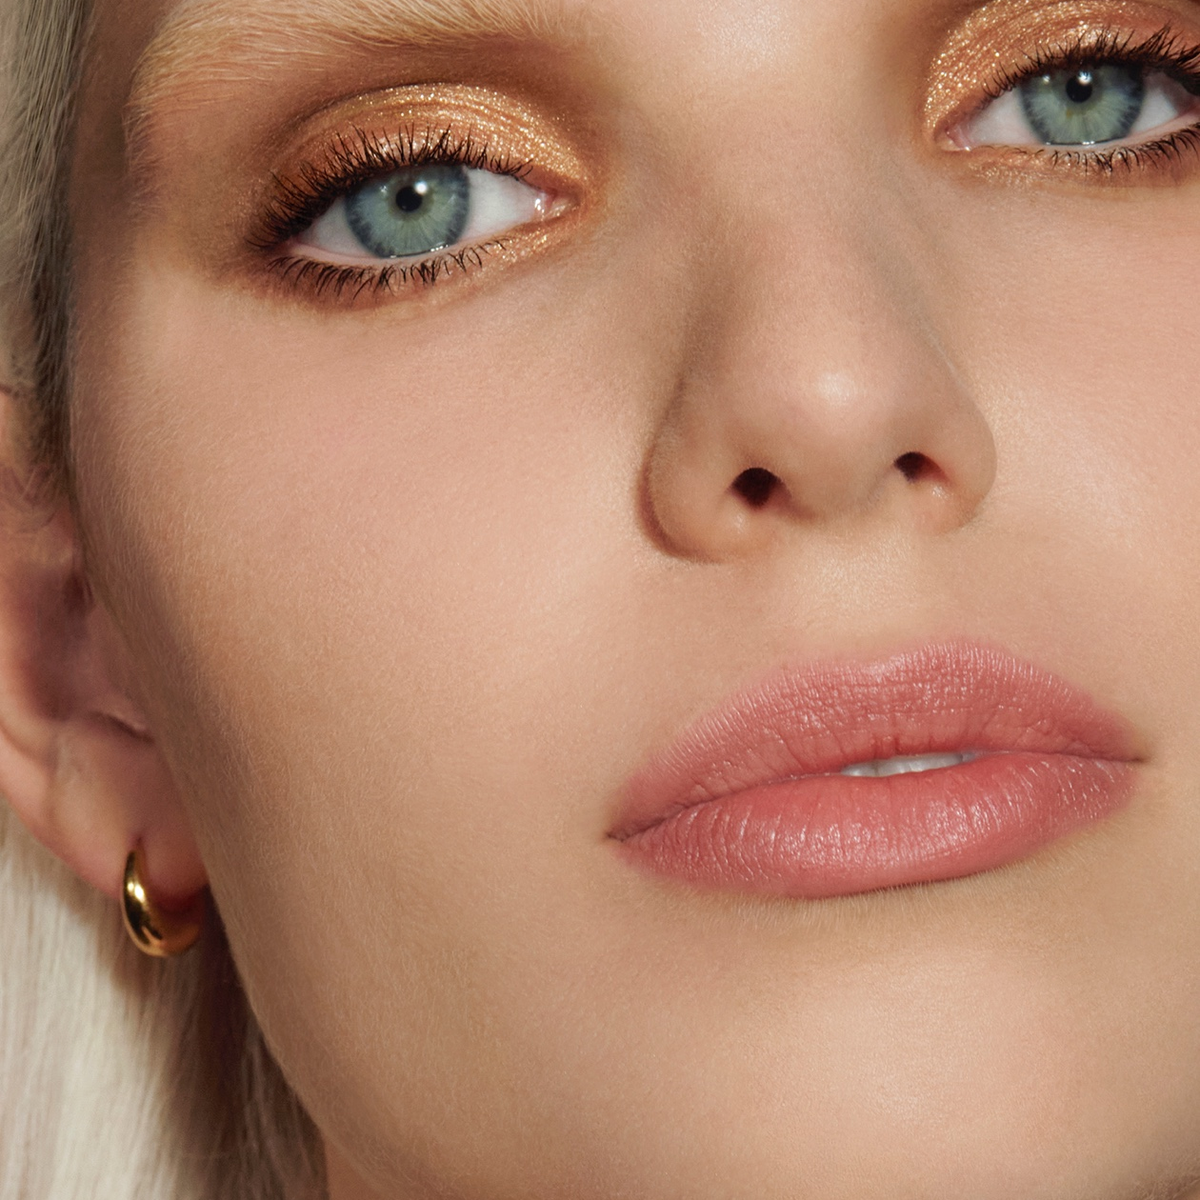 Image of a model wearing the Rose Inc Satin and Shimmer Eyeshadow Duet Palette in Copper along with the Ultra-Black Mascara.